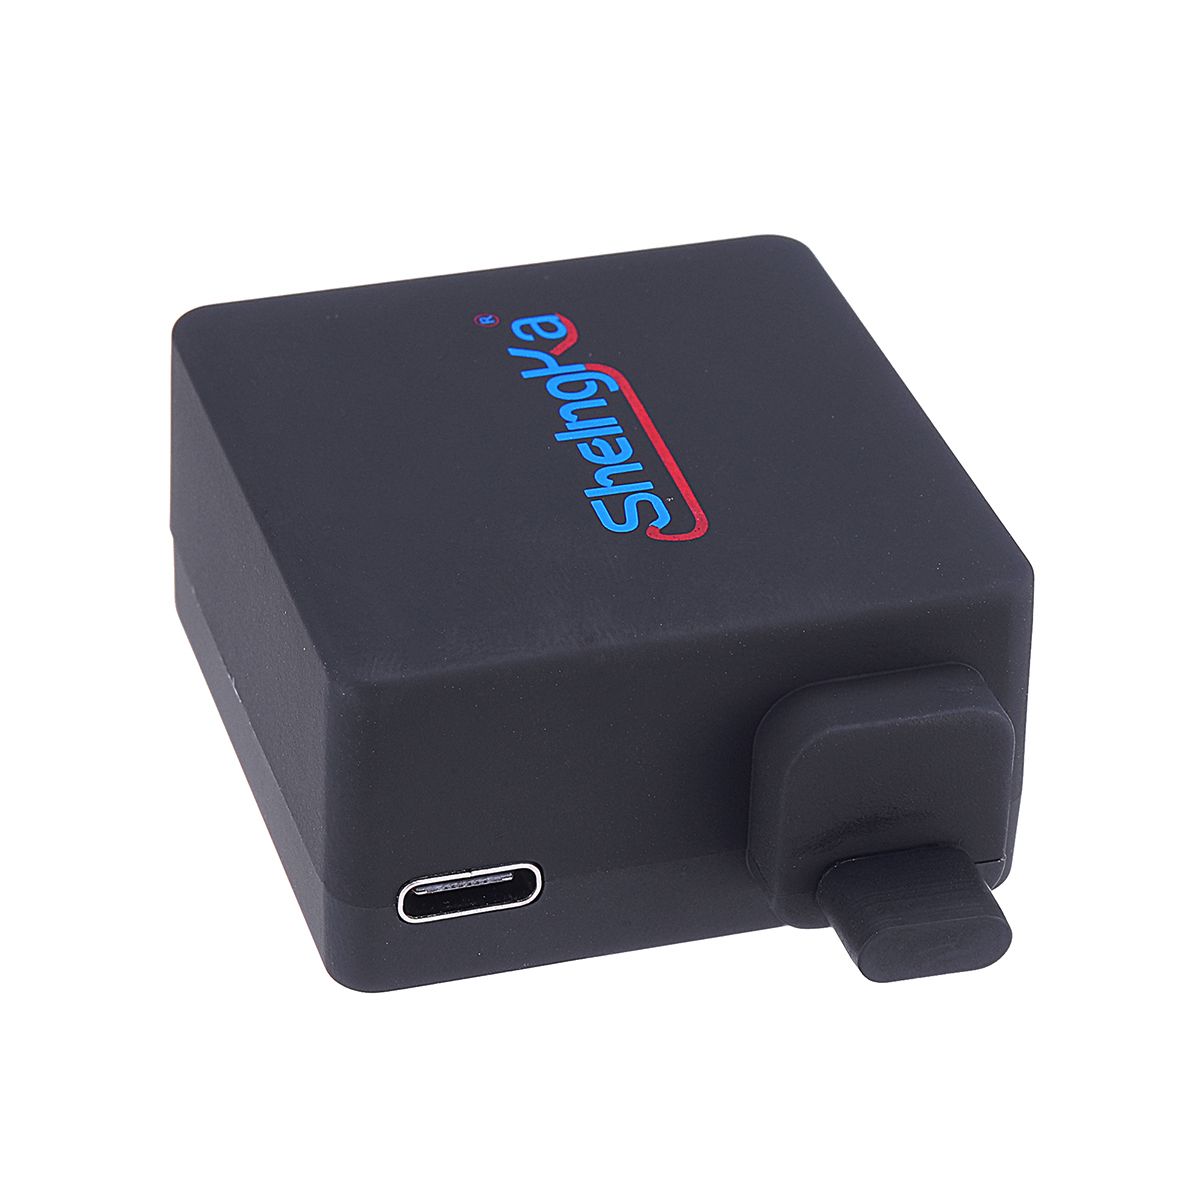 Sheingka-FLW221-2300mAh-Rechargeable-External-Side-Type-C-Battery-for-GoPro-Hero-7-6-5-Black-Action--1455989